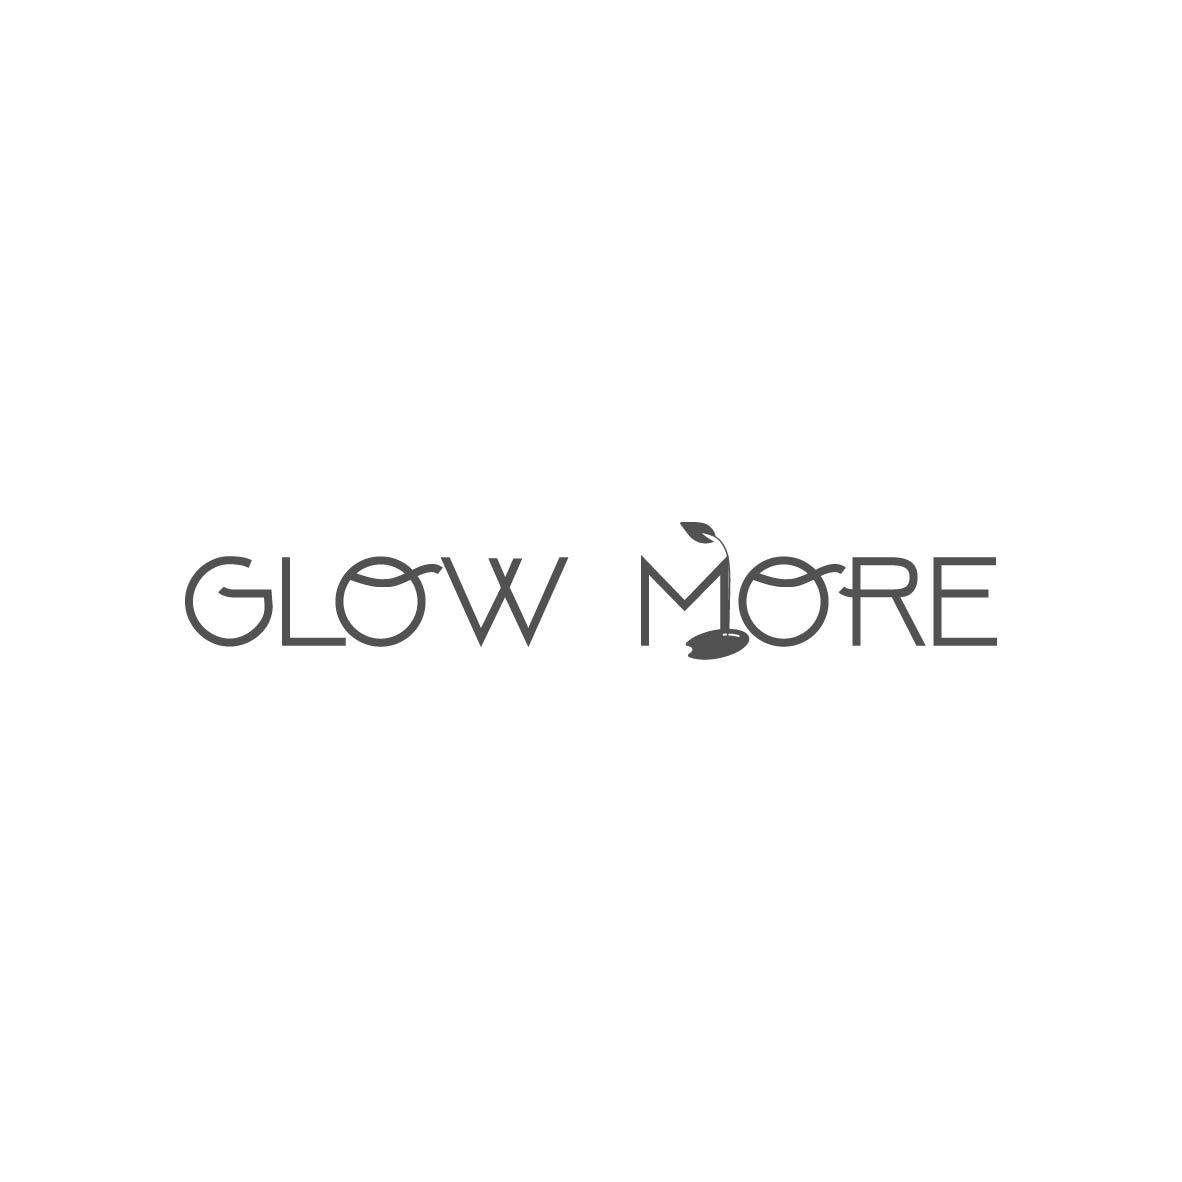 GLOW MORE